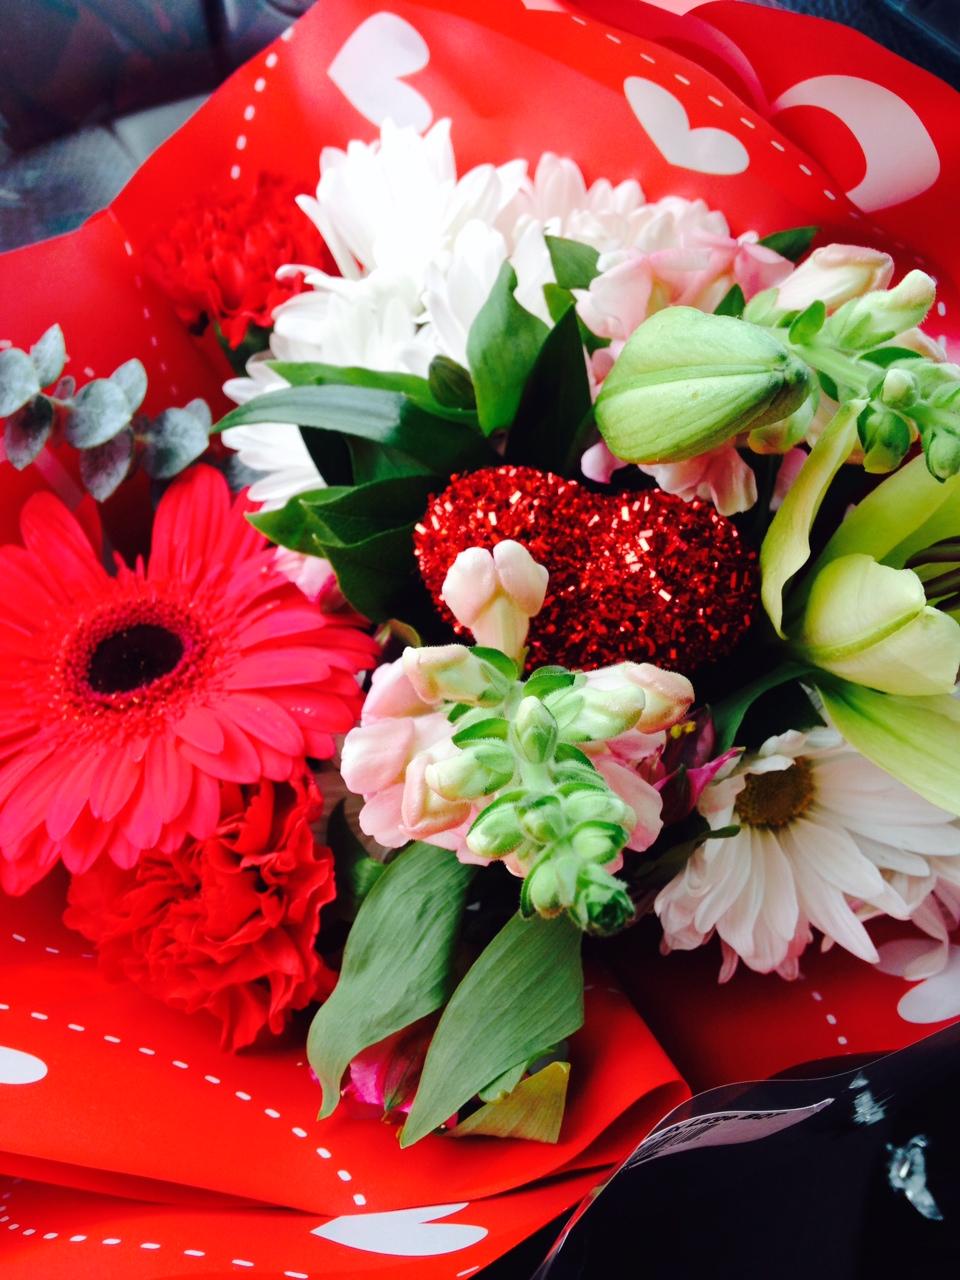 Girls receive beautiful bouquets of flowers on Valentines Day.